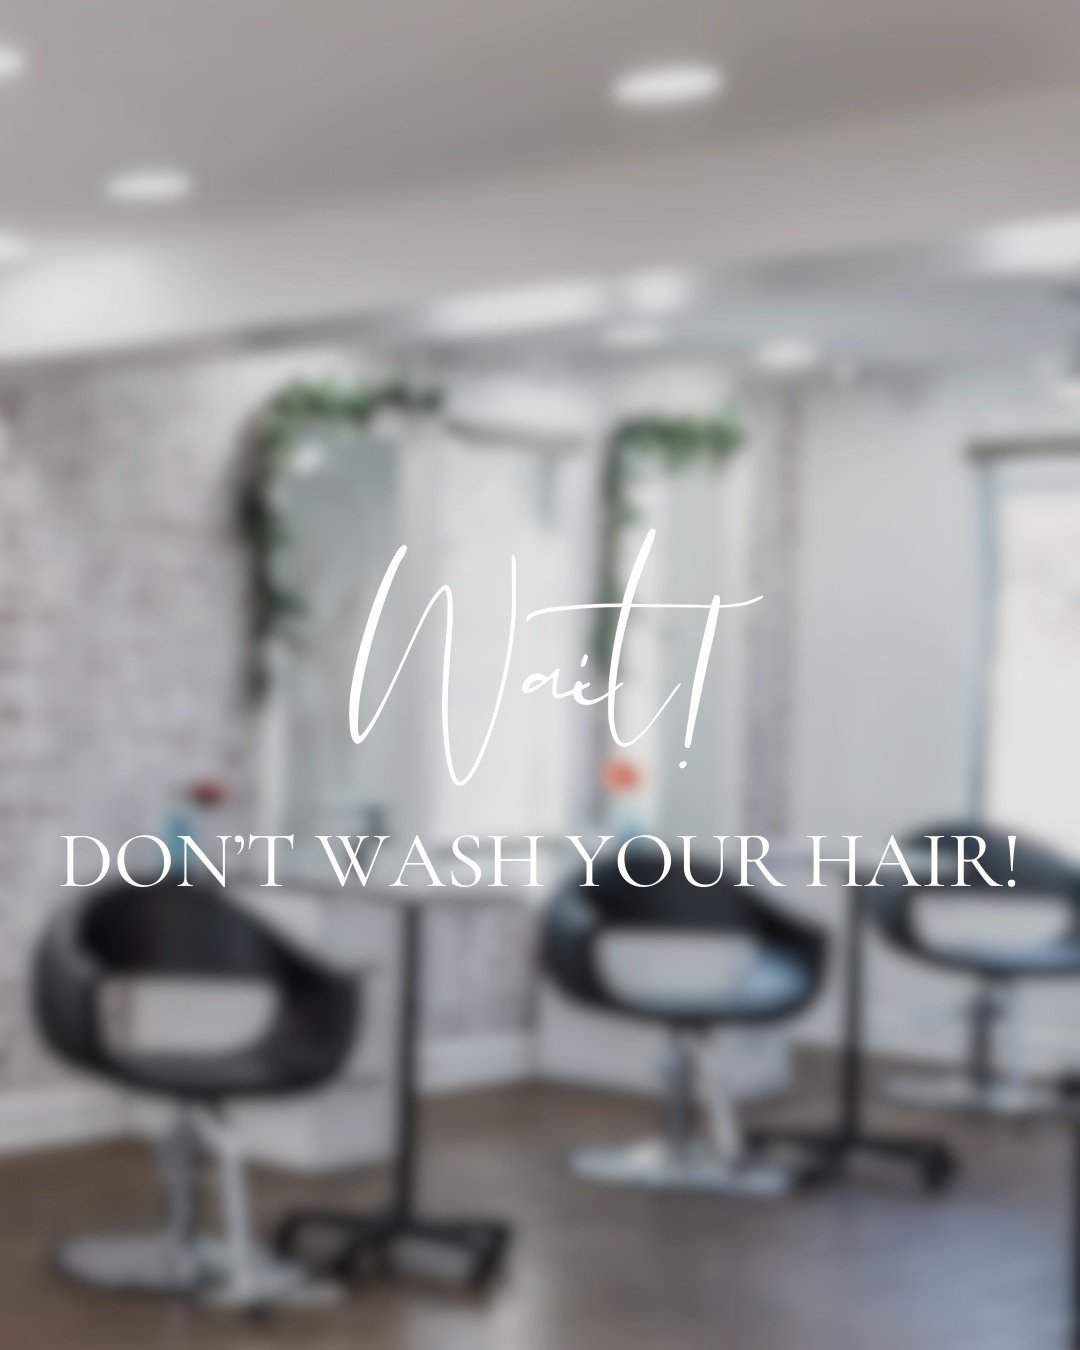 This is the one time we'll tell you not to wash your hair...

After a color service!

You should wait at least 48 hours after a color service to shampoo your hair.

And if you're a red head or have vivid colors in your hair, be sure to shampoo with c